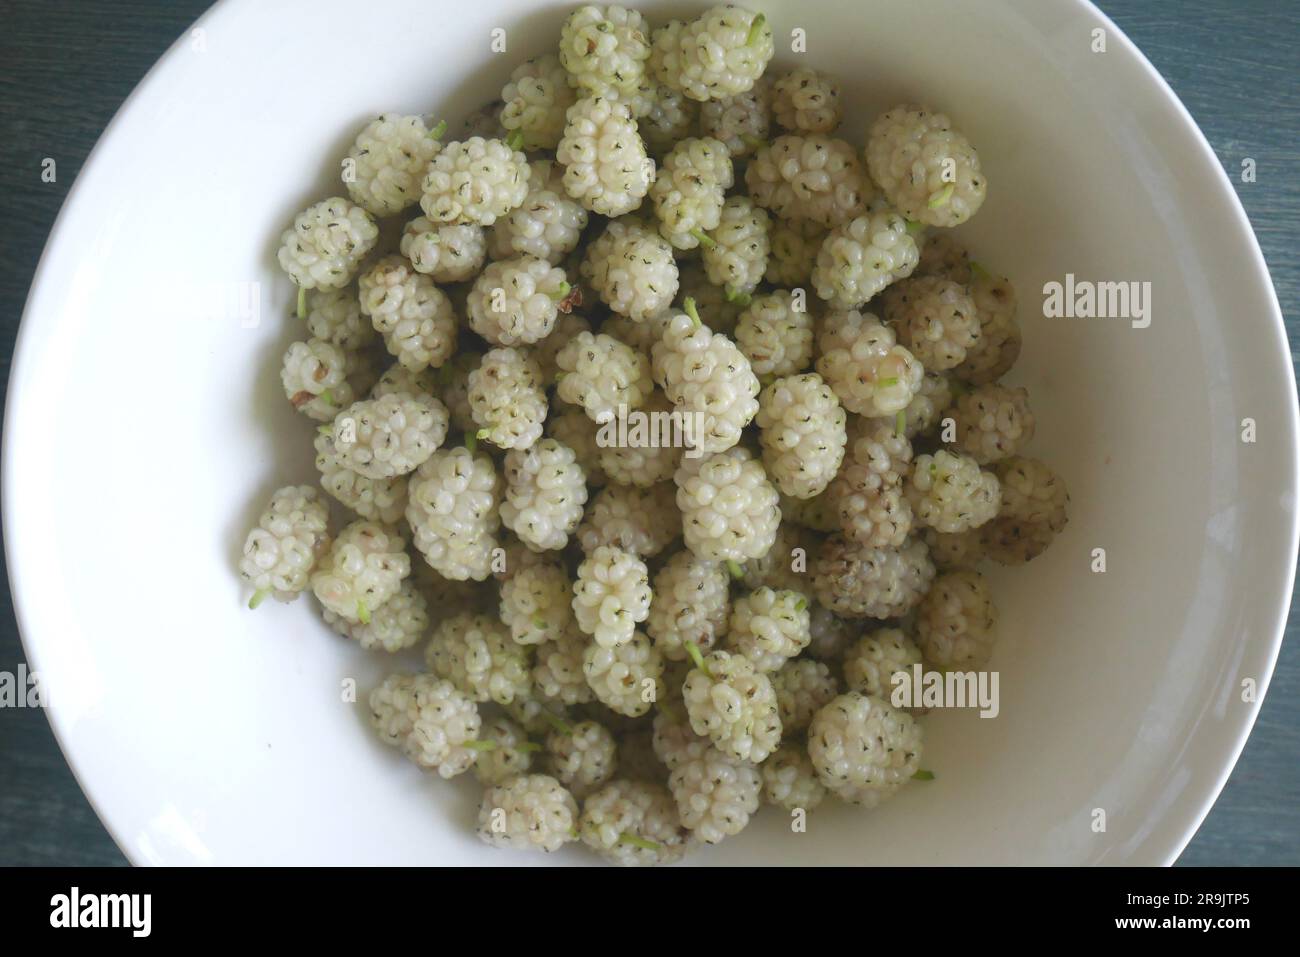 White mulberries, Morus Alba, in a white bowl on a table Stock Photo